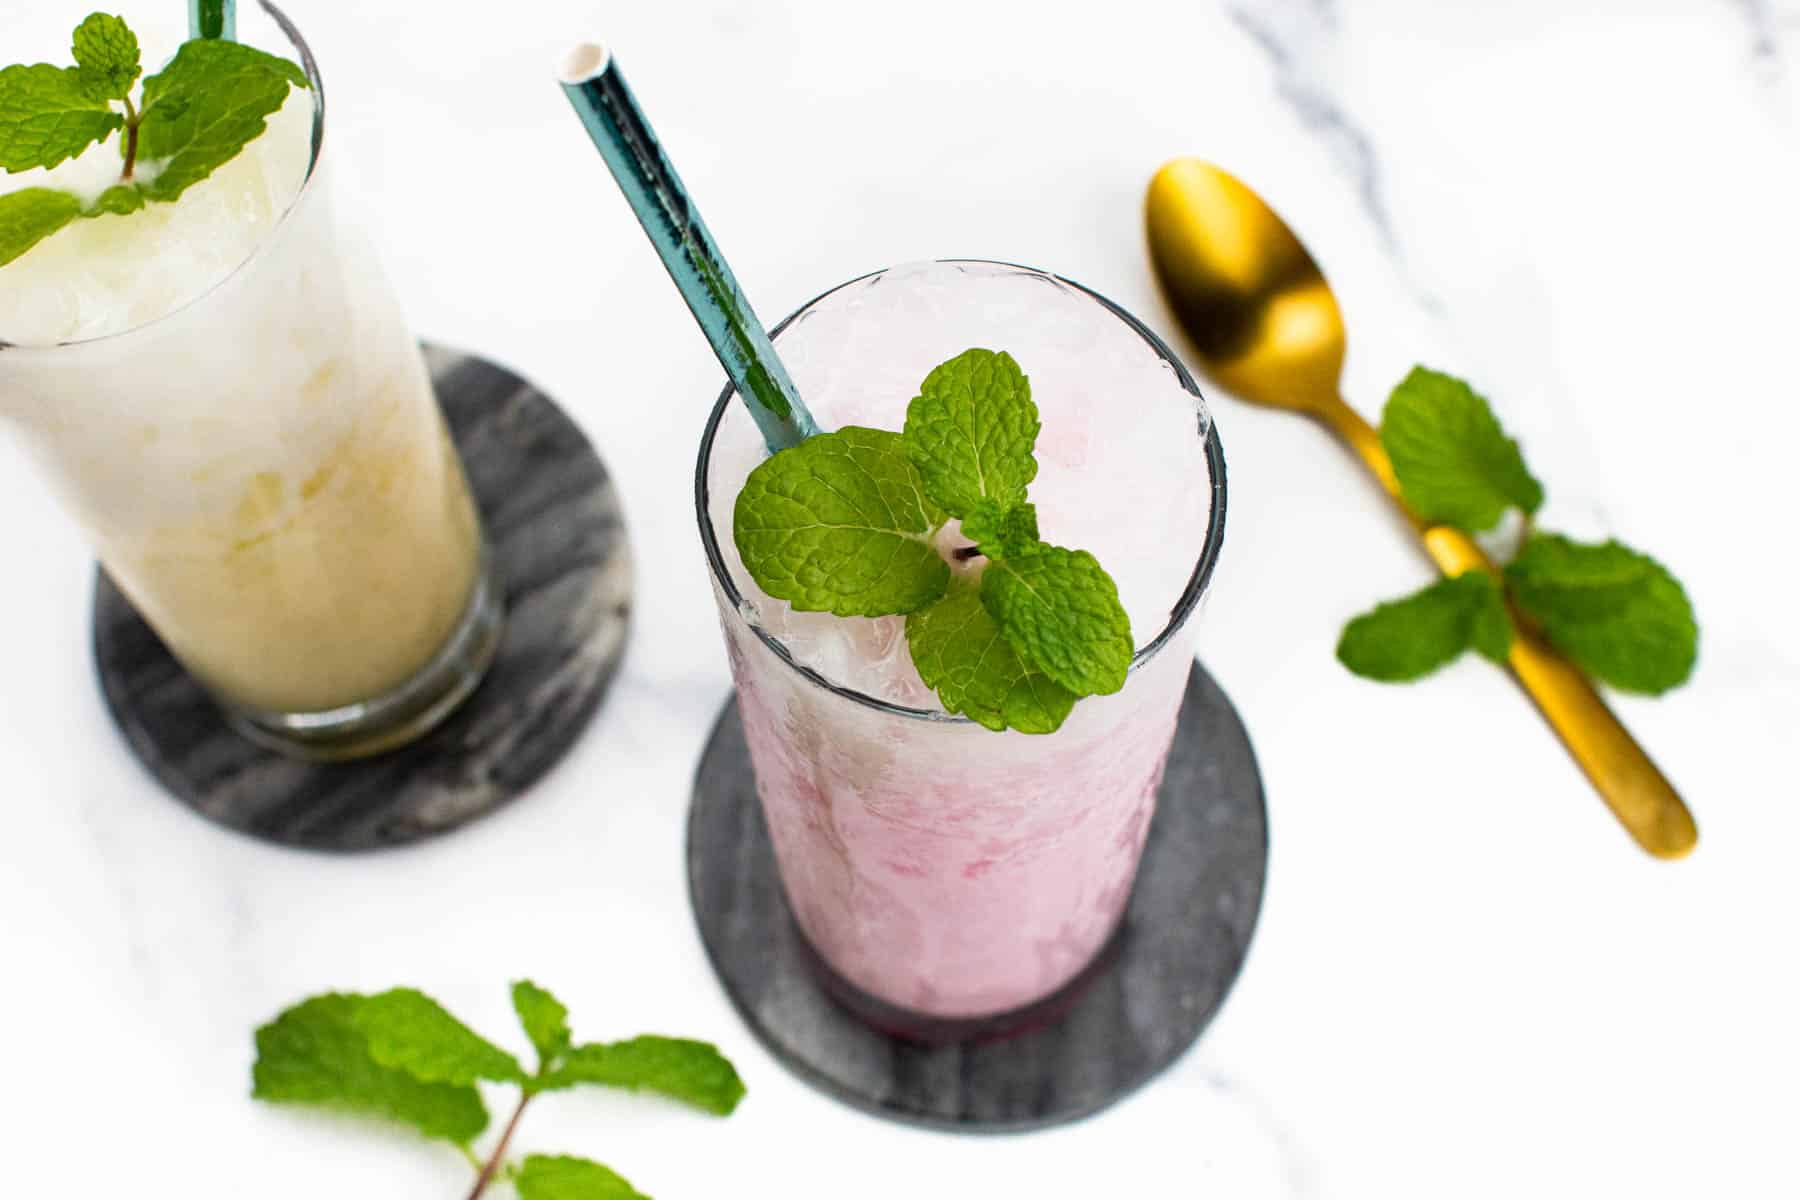 An overhead view of two creamy French sodas garnished with mint sprigs.